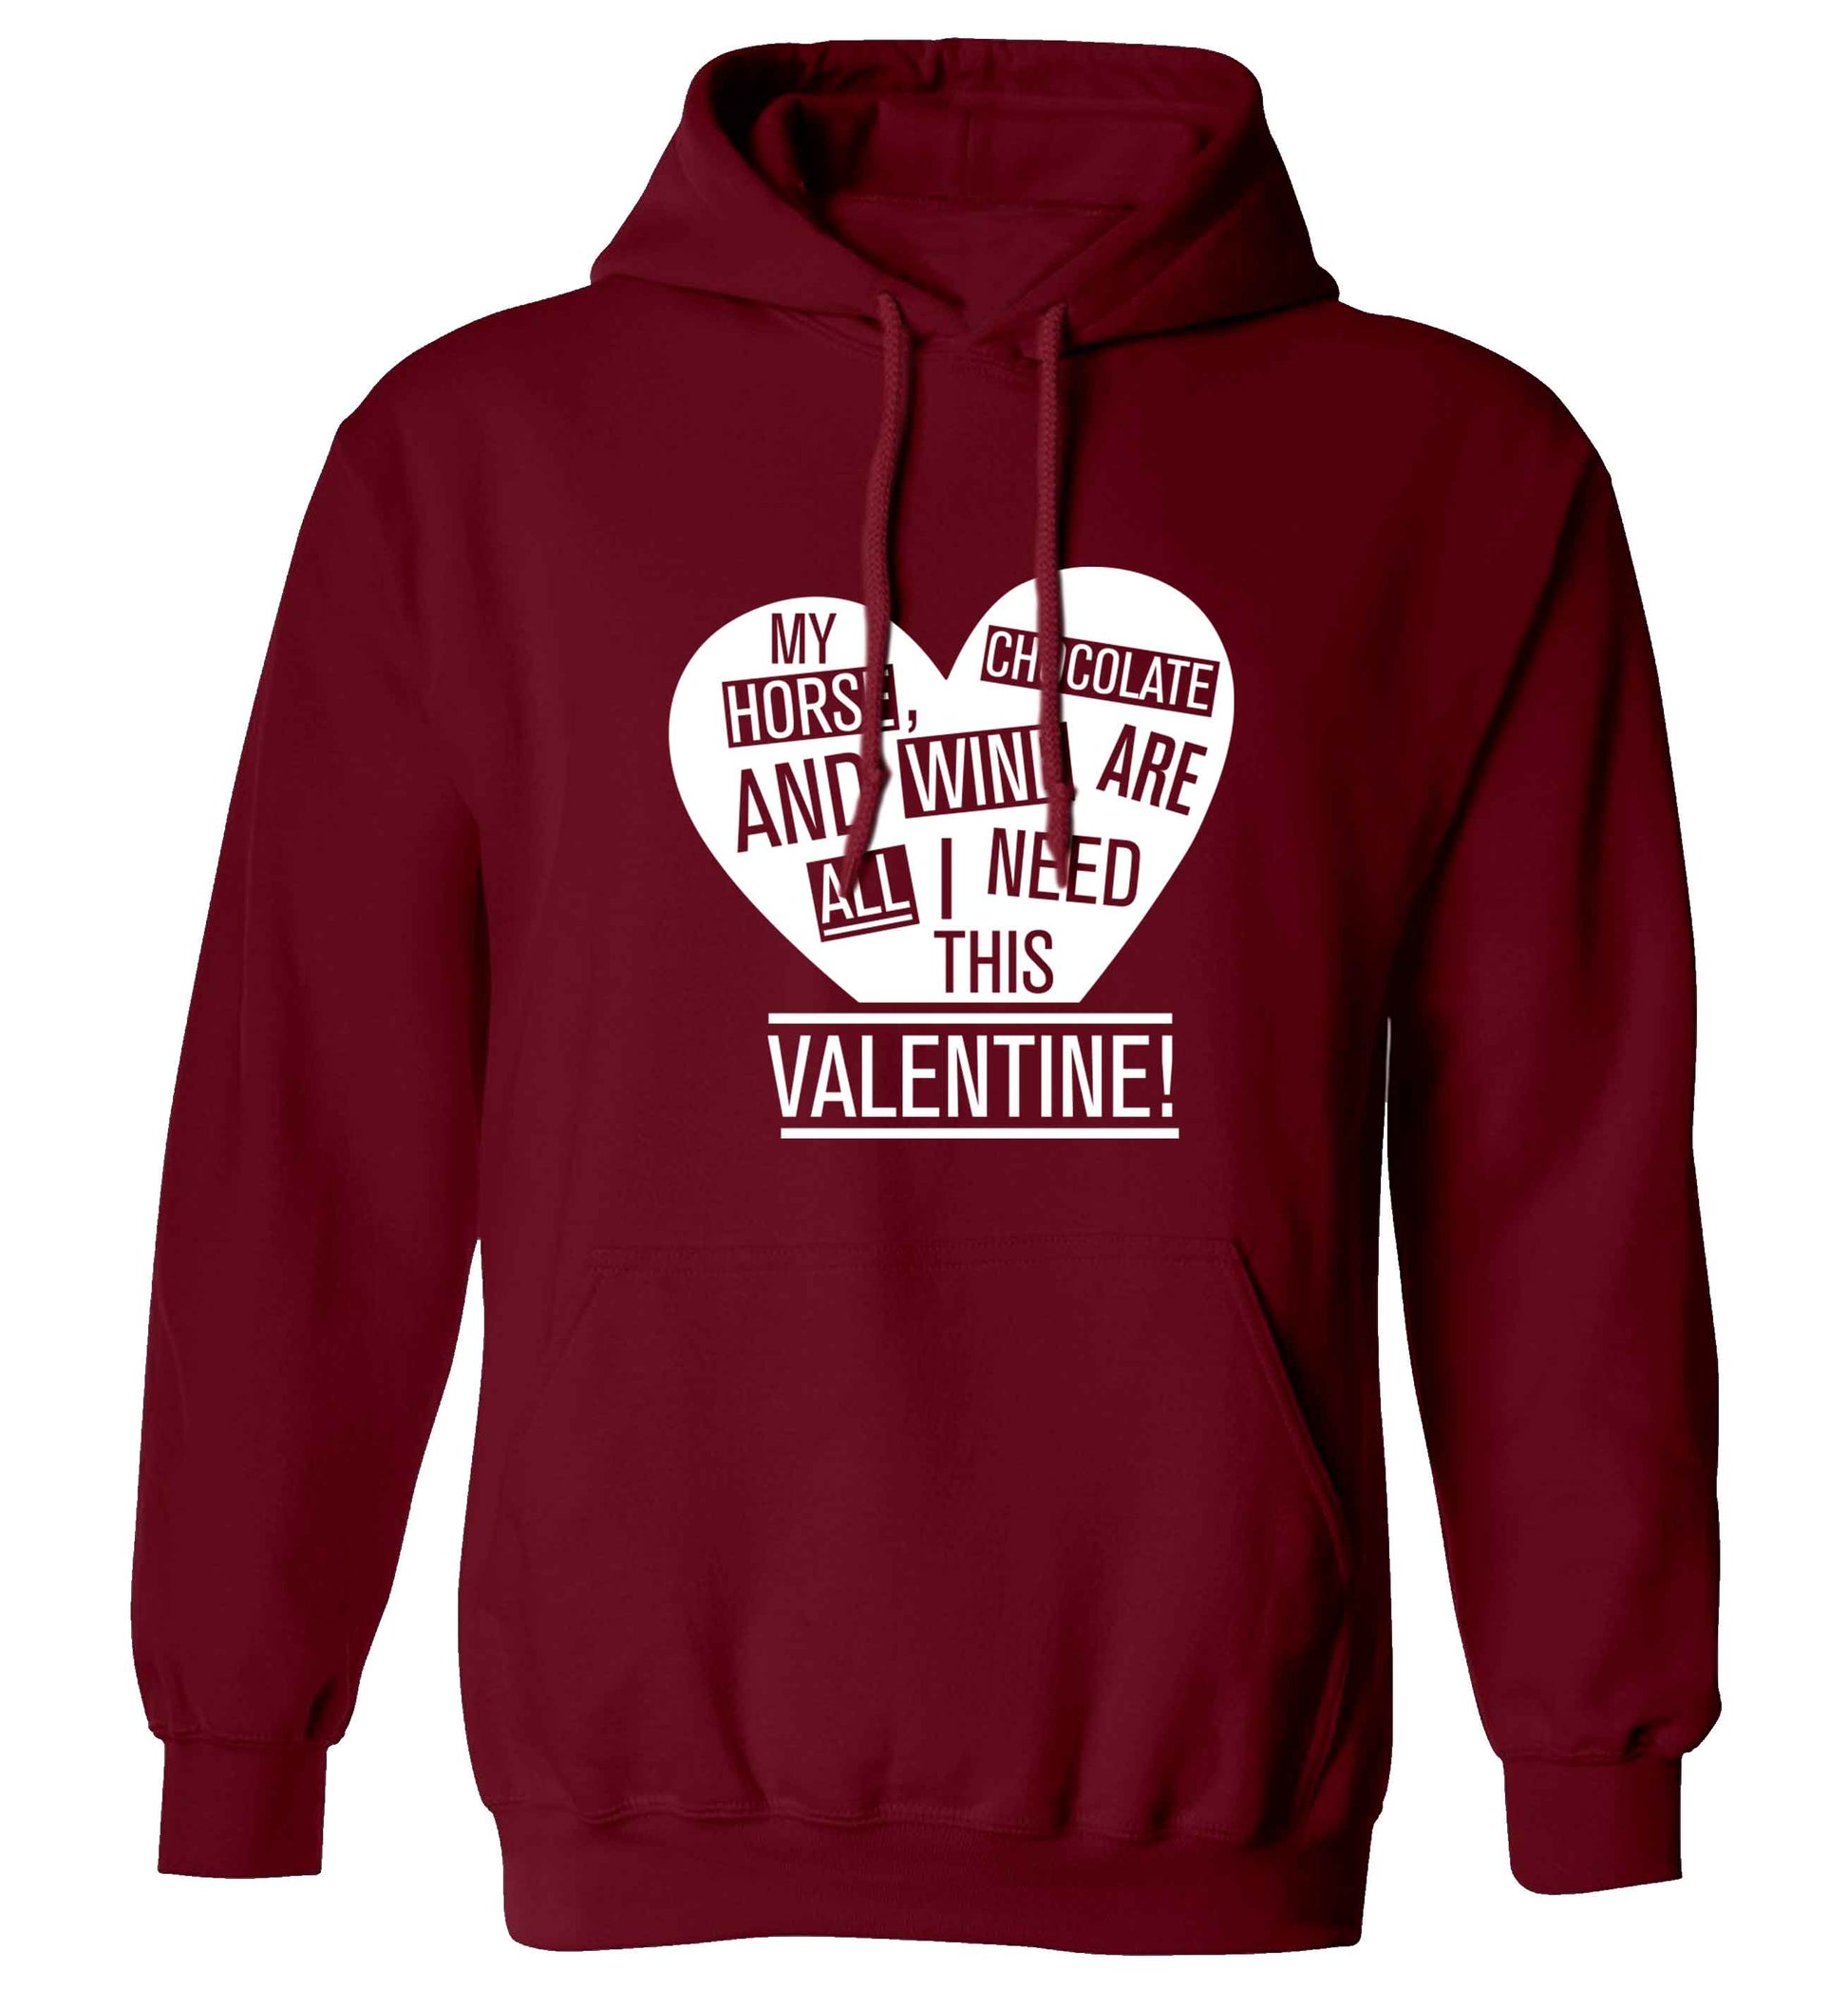 My horse chocolate and wine are all I need this valentine adults unisex maroon hoodie 2XL